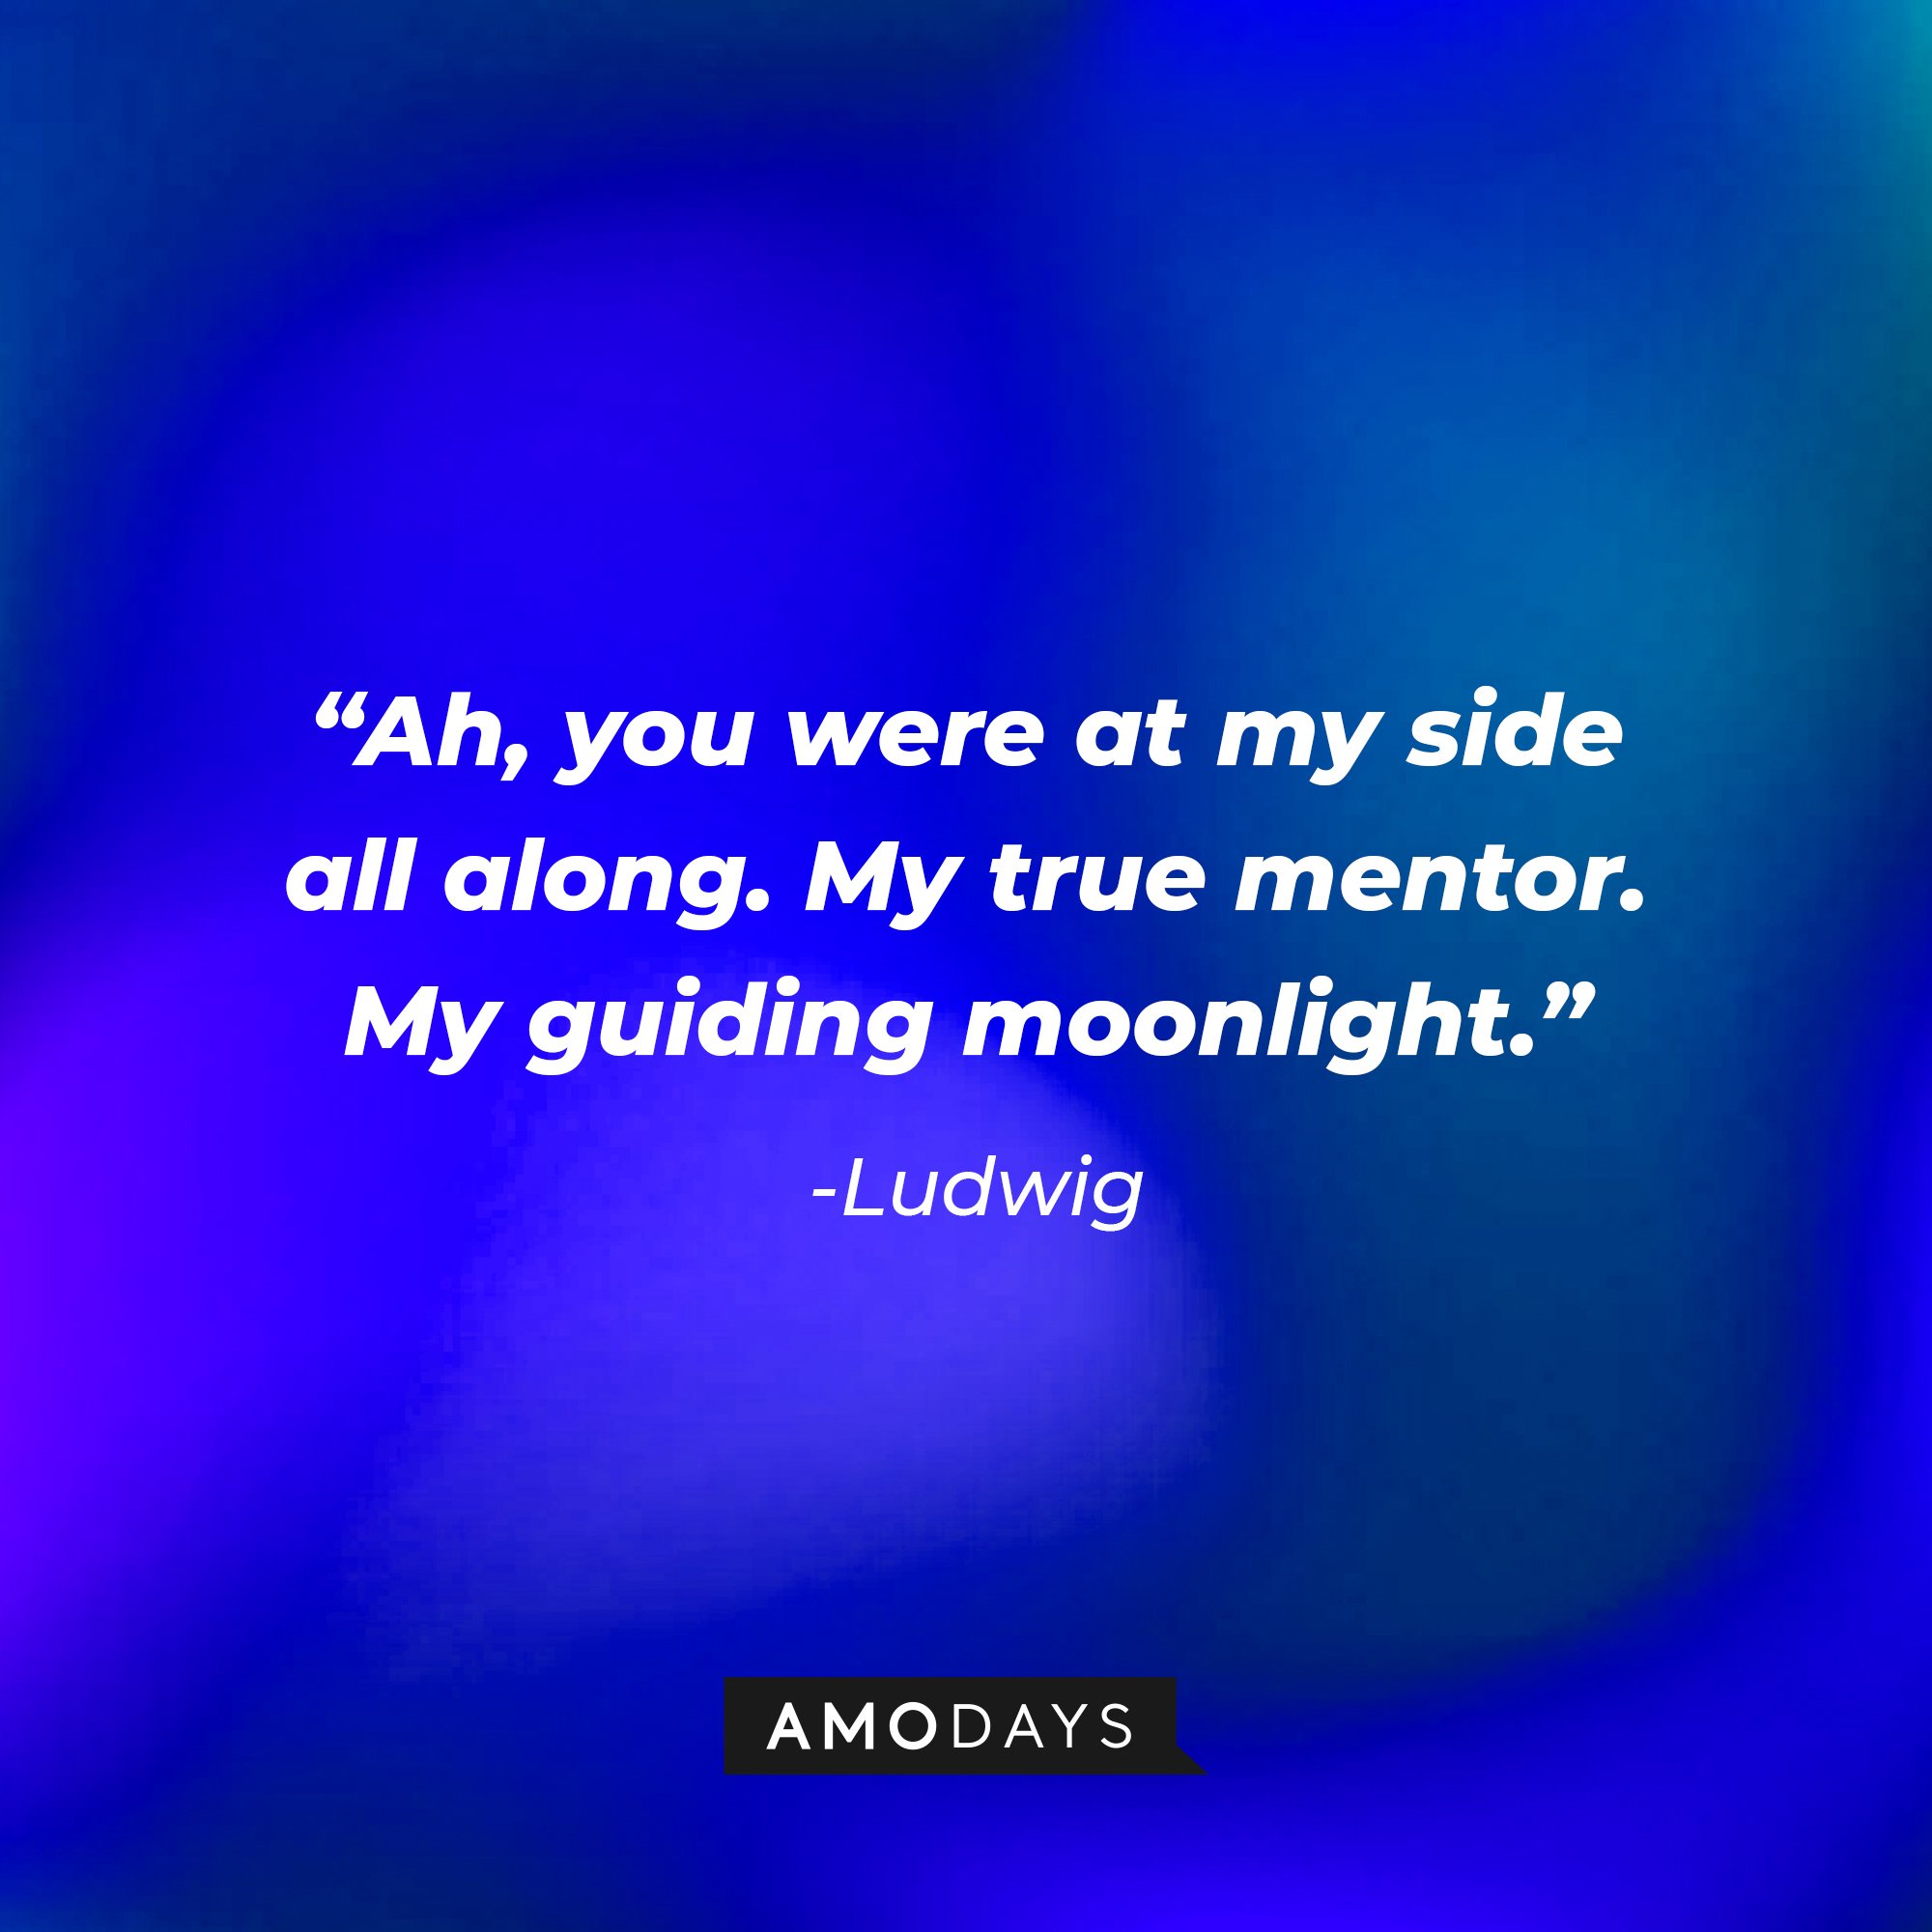  Ludwig’s quote: "Ah, you were at my side all along. My true mentor. My guiding moonlight." | Image: AmoDays